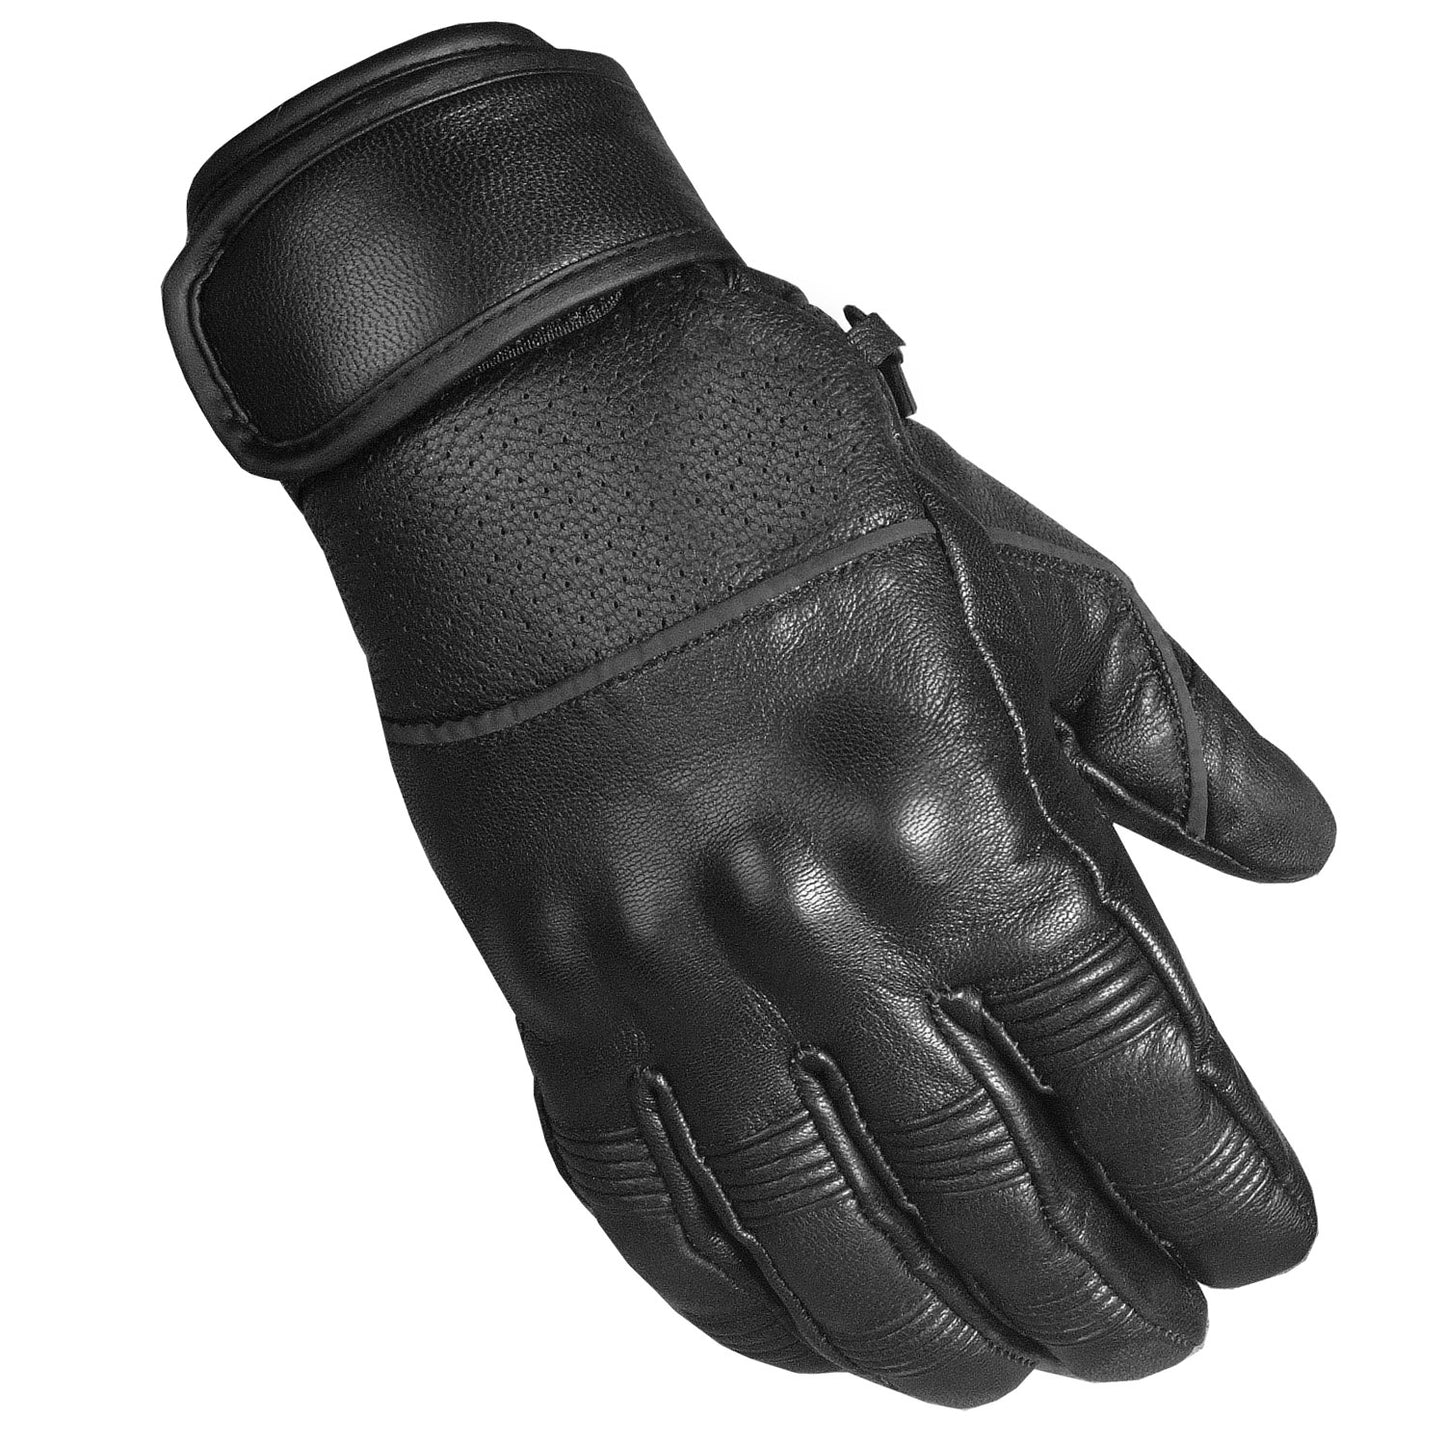 Men's New Motorcycle Leather Armor Gel Padded Ventilated Reflective Gloves